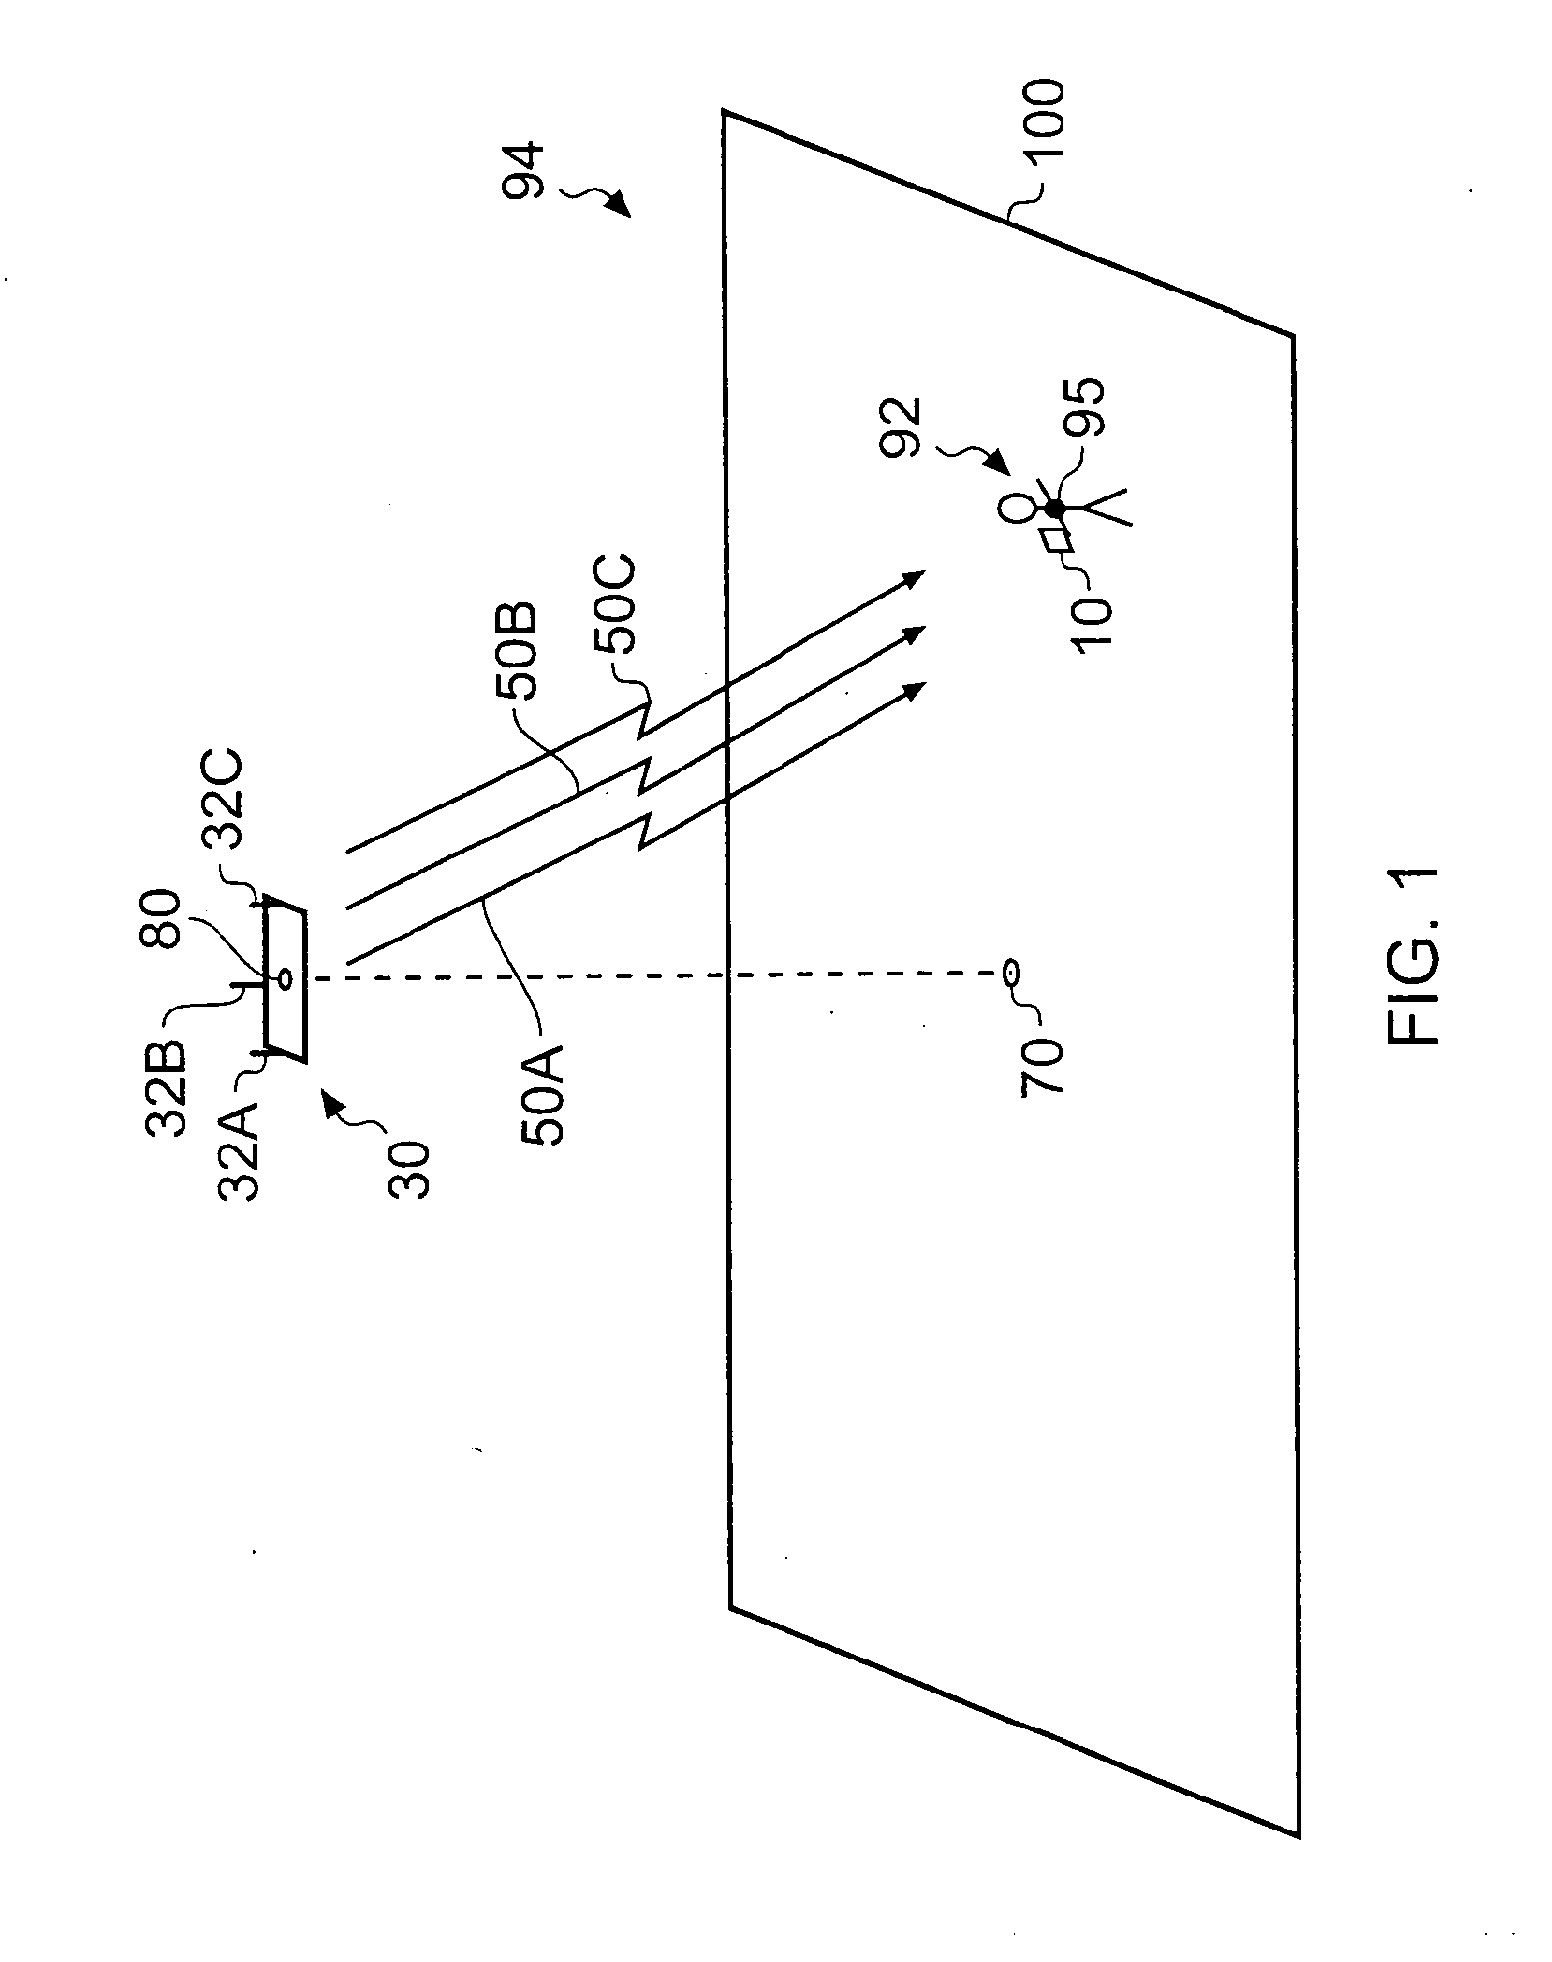 Indoor positioning system and method